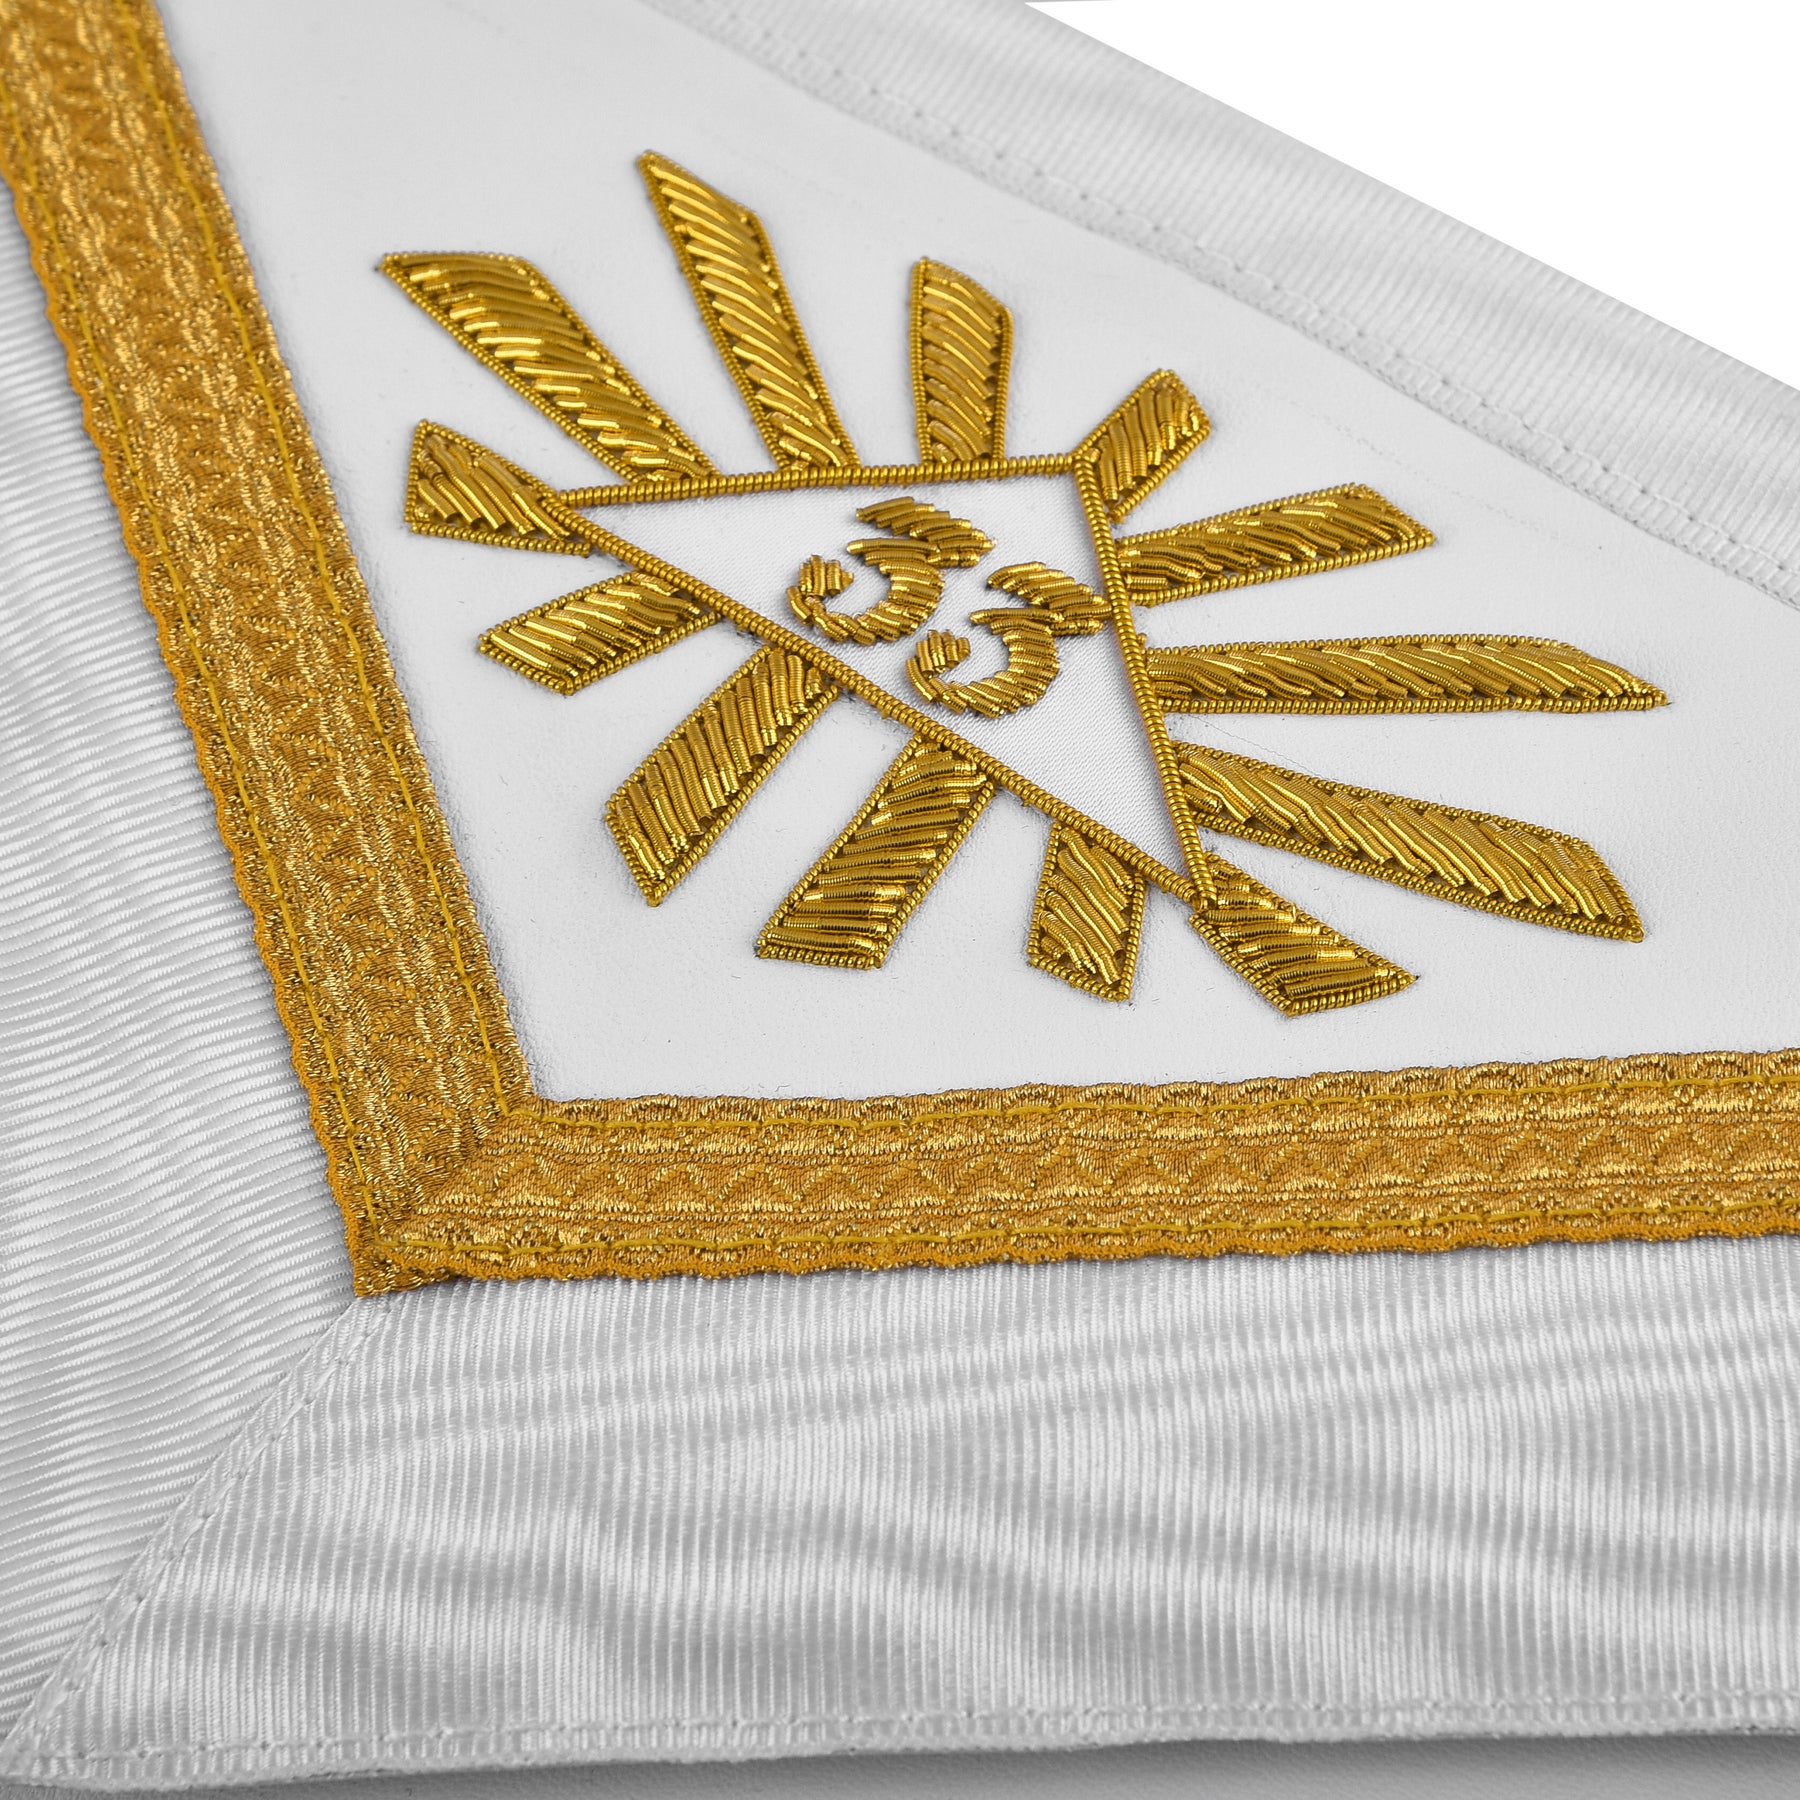 33rd Degree Scottish Rite Apron - Hand Embroidery Gold Bullion Wings Up ALL COUNTRIES FLAGS - Bricks Masons